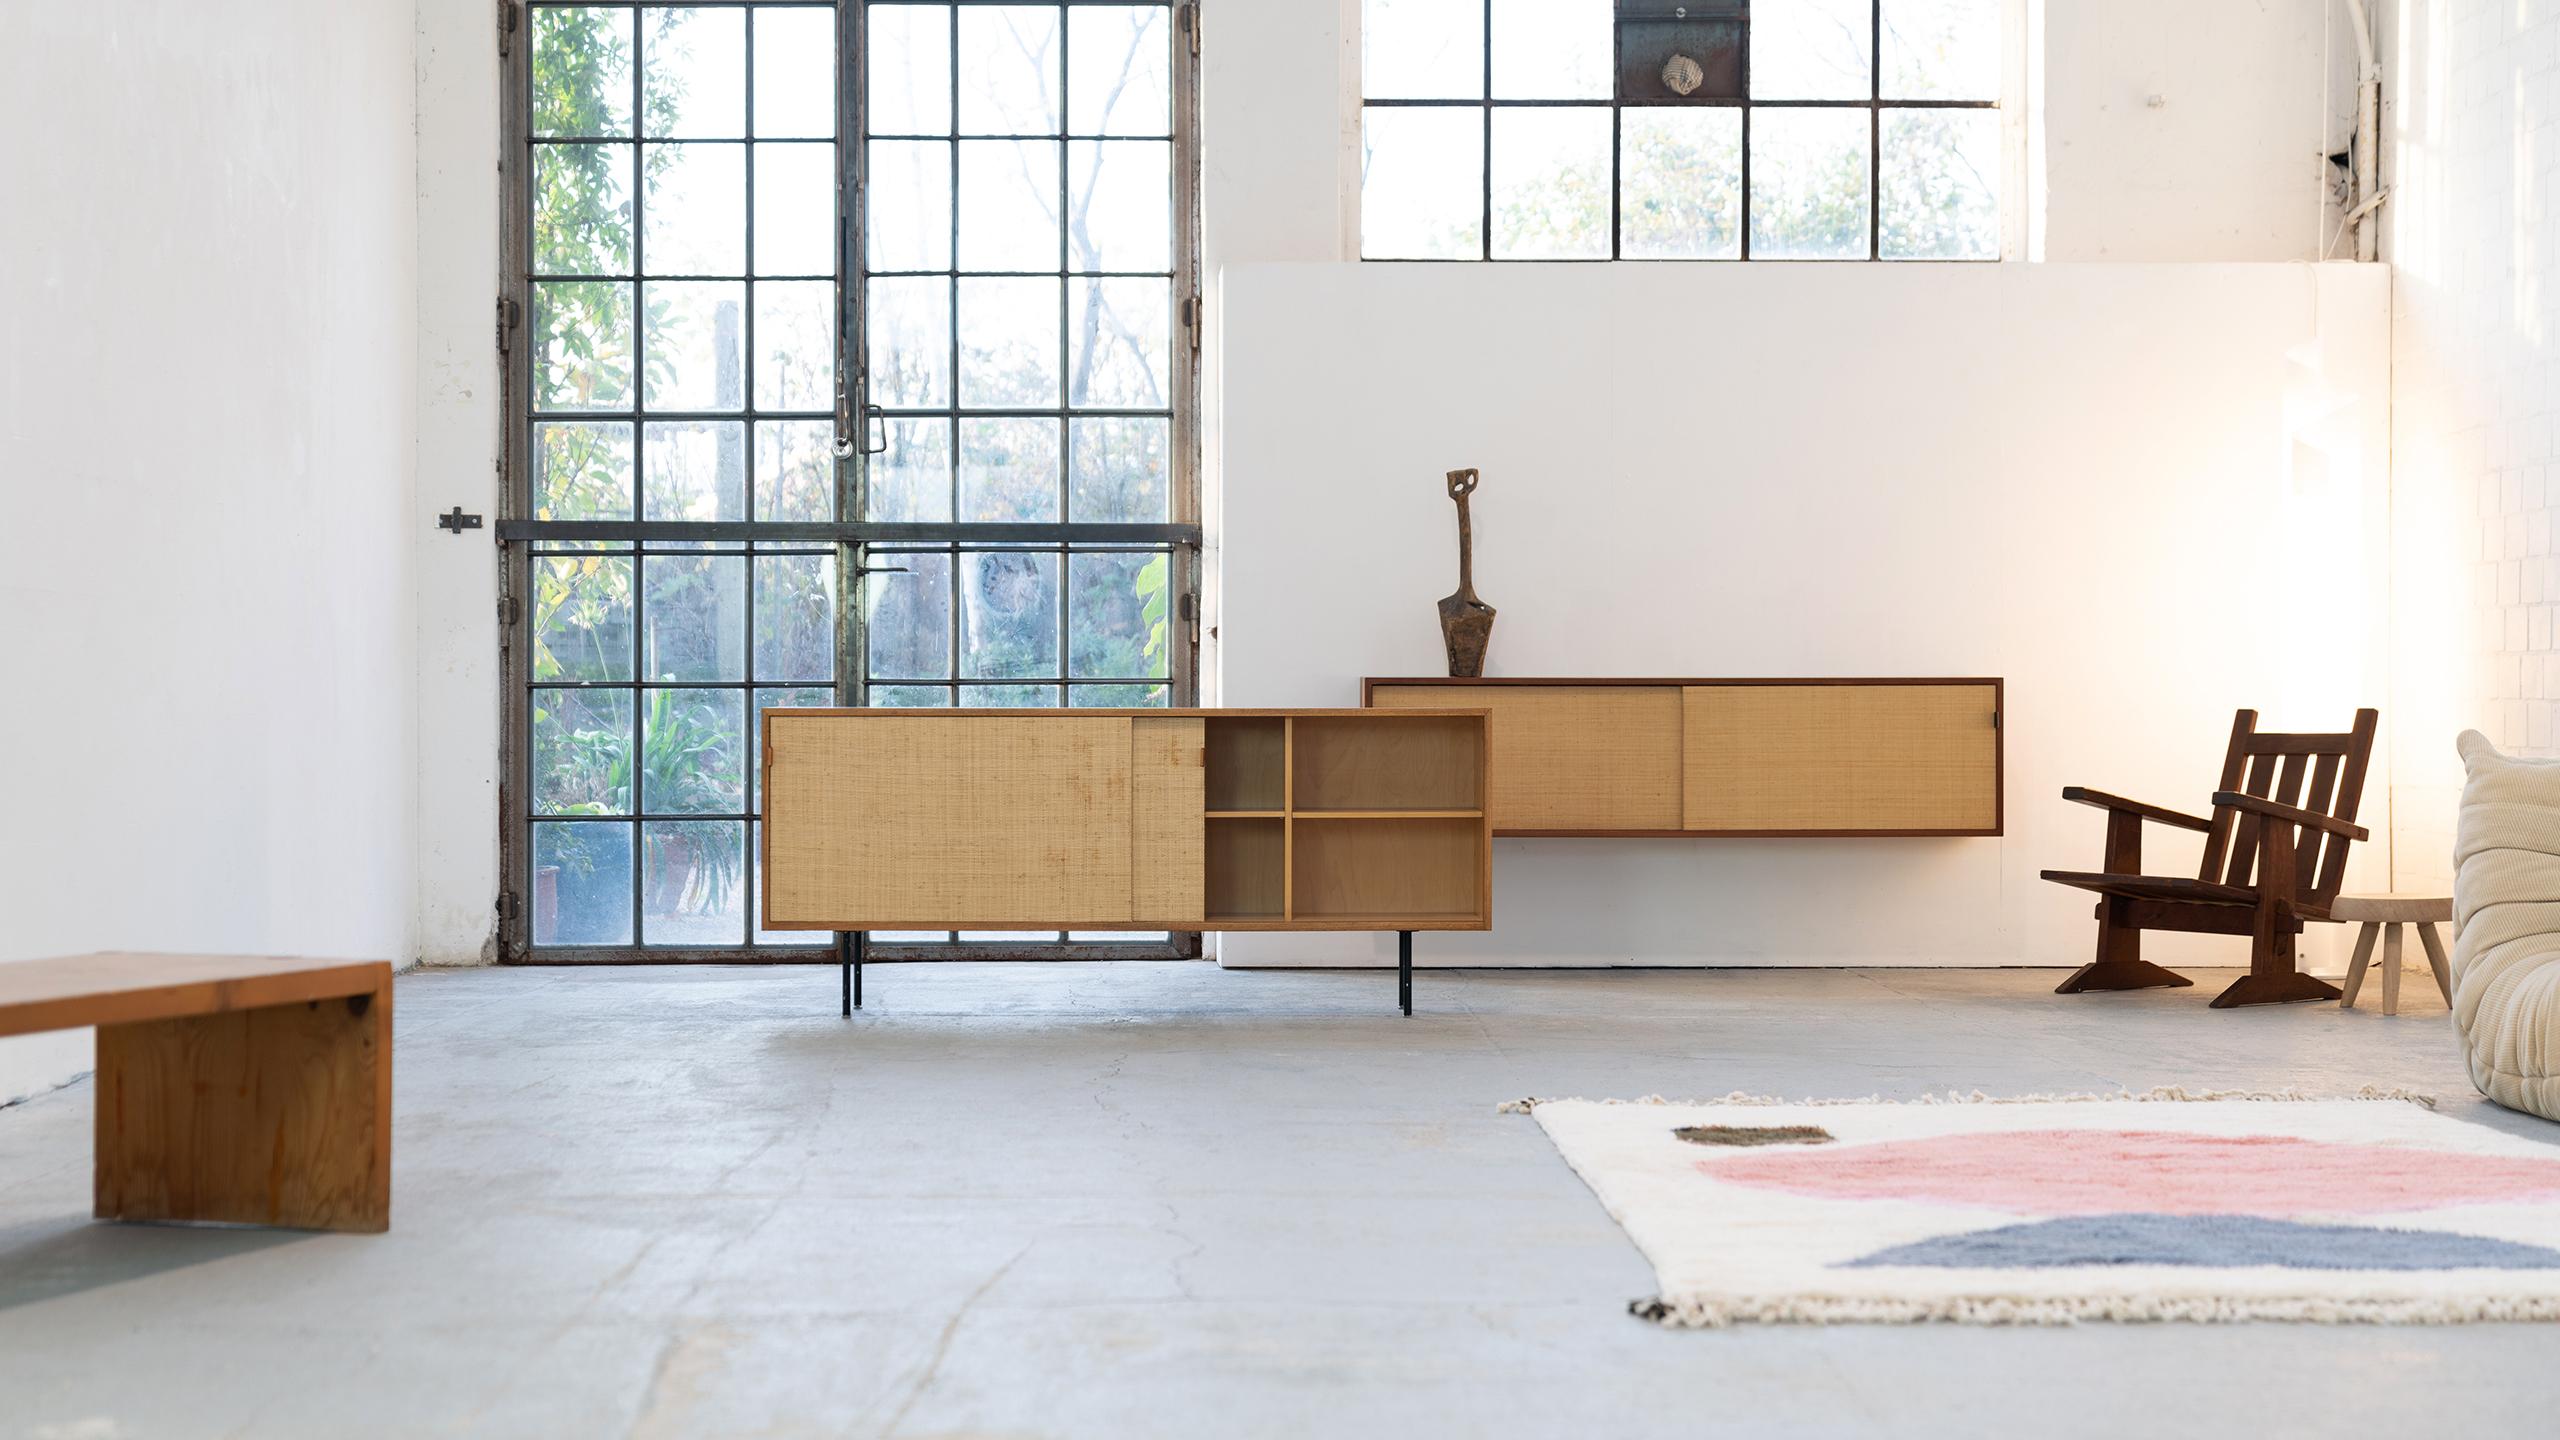 German Florence Knoll, Sideboard 1968 Seagrass Doors and Walnut by Knoll International